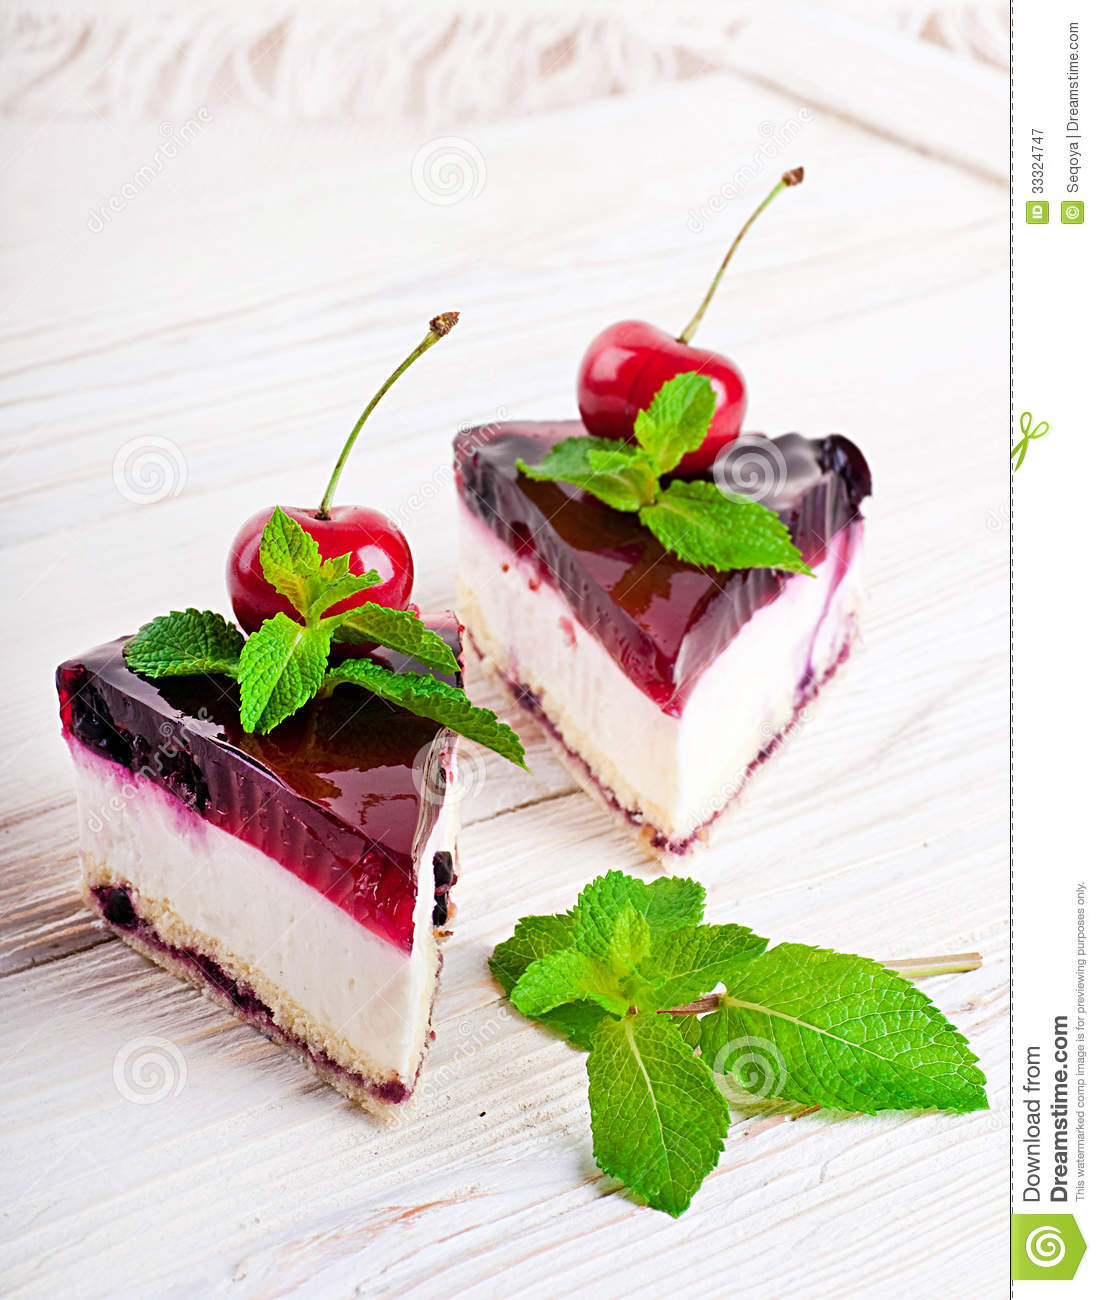 Cherry Cheesecake Royalty Free Stock Photography   Image  33324747